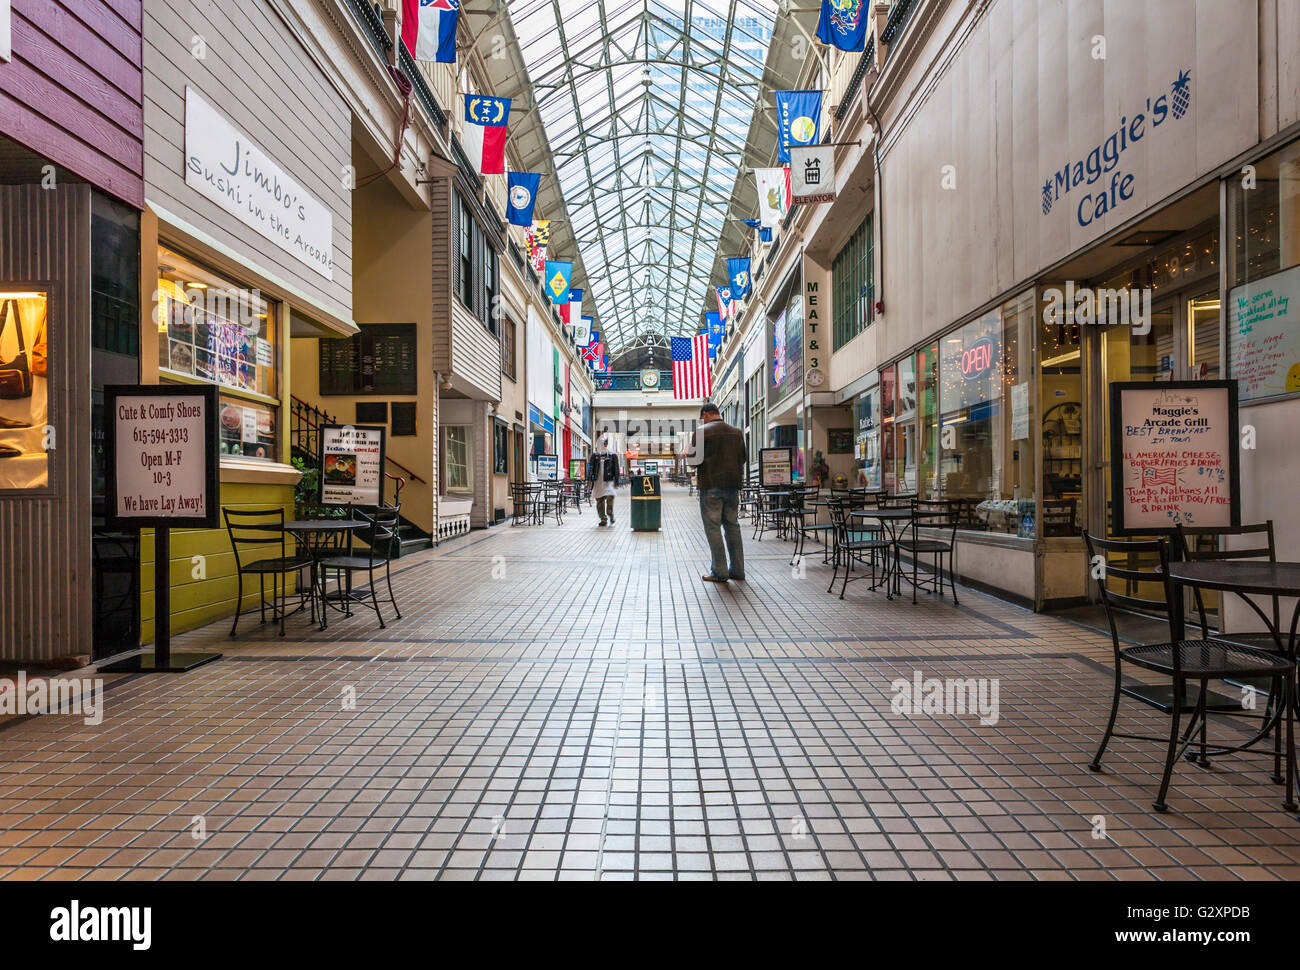 The historic Arcade shopping center in downtown Nashville, Tennessee Stock Photo